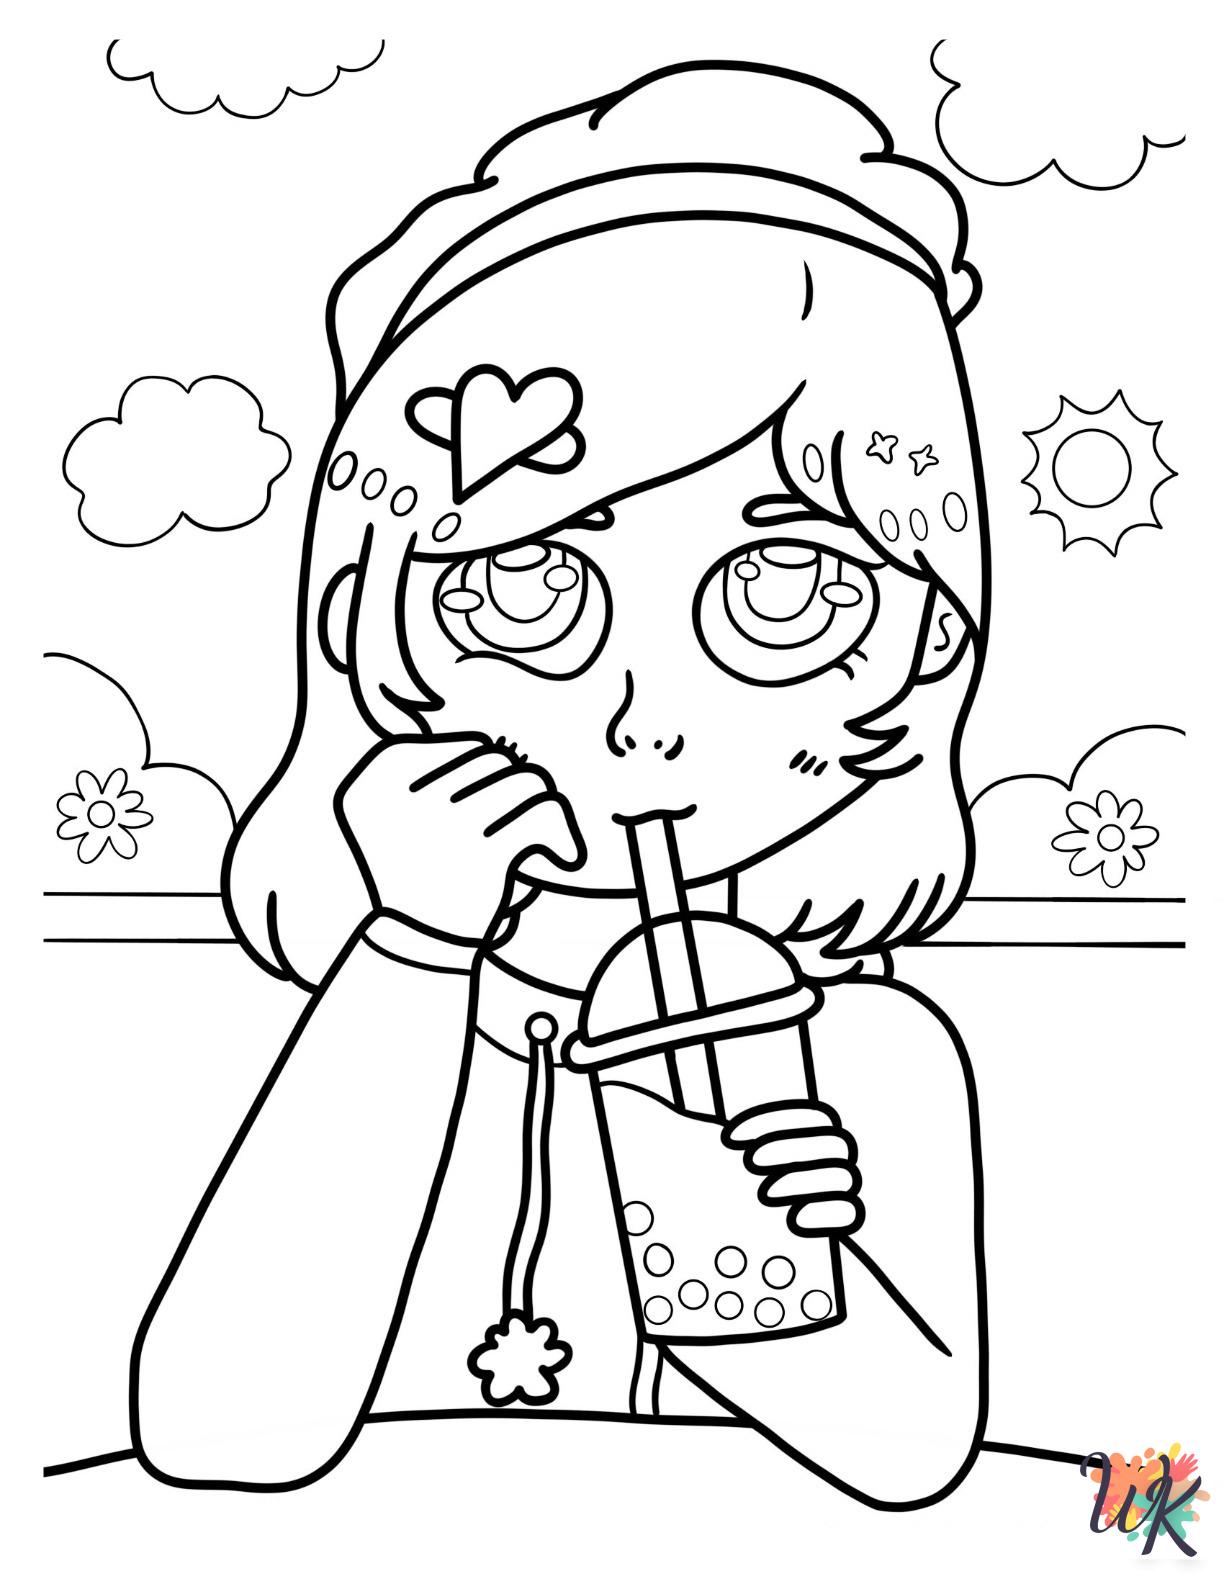 detailed Boba Tea coloring pages